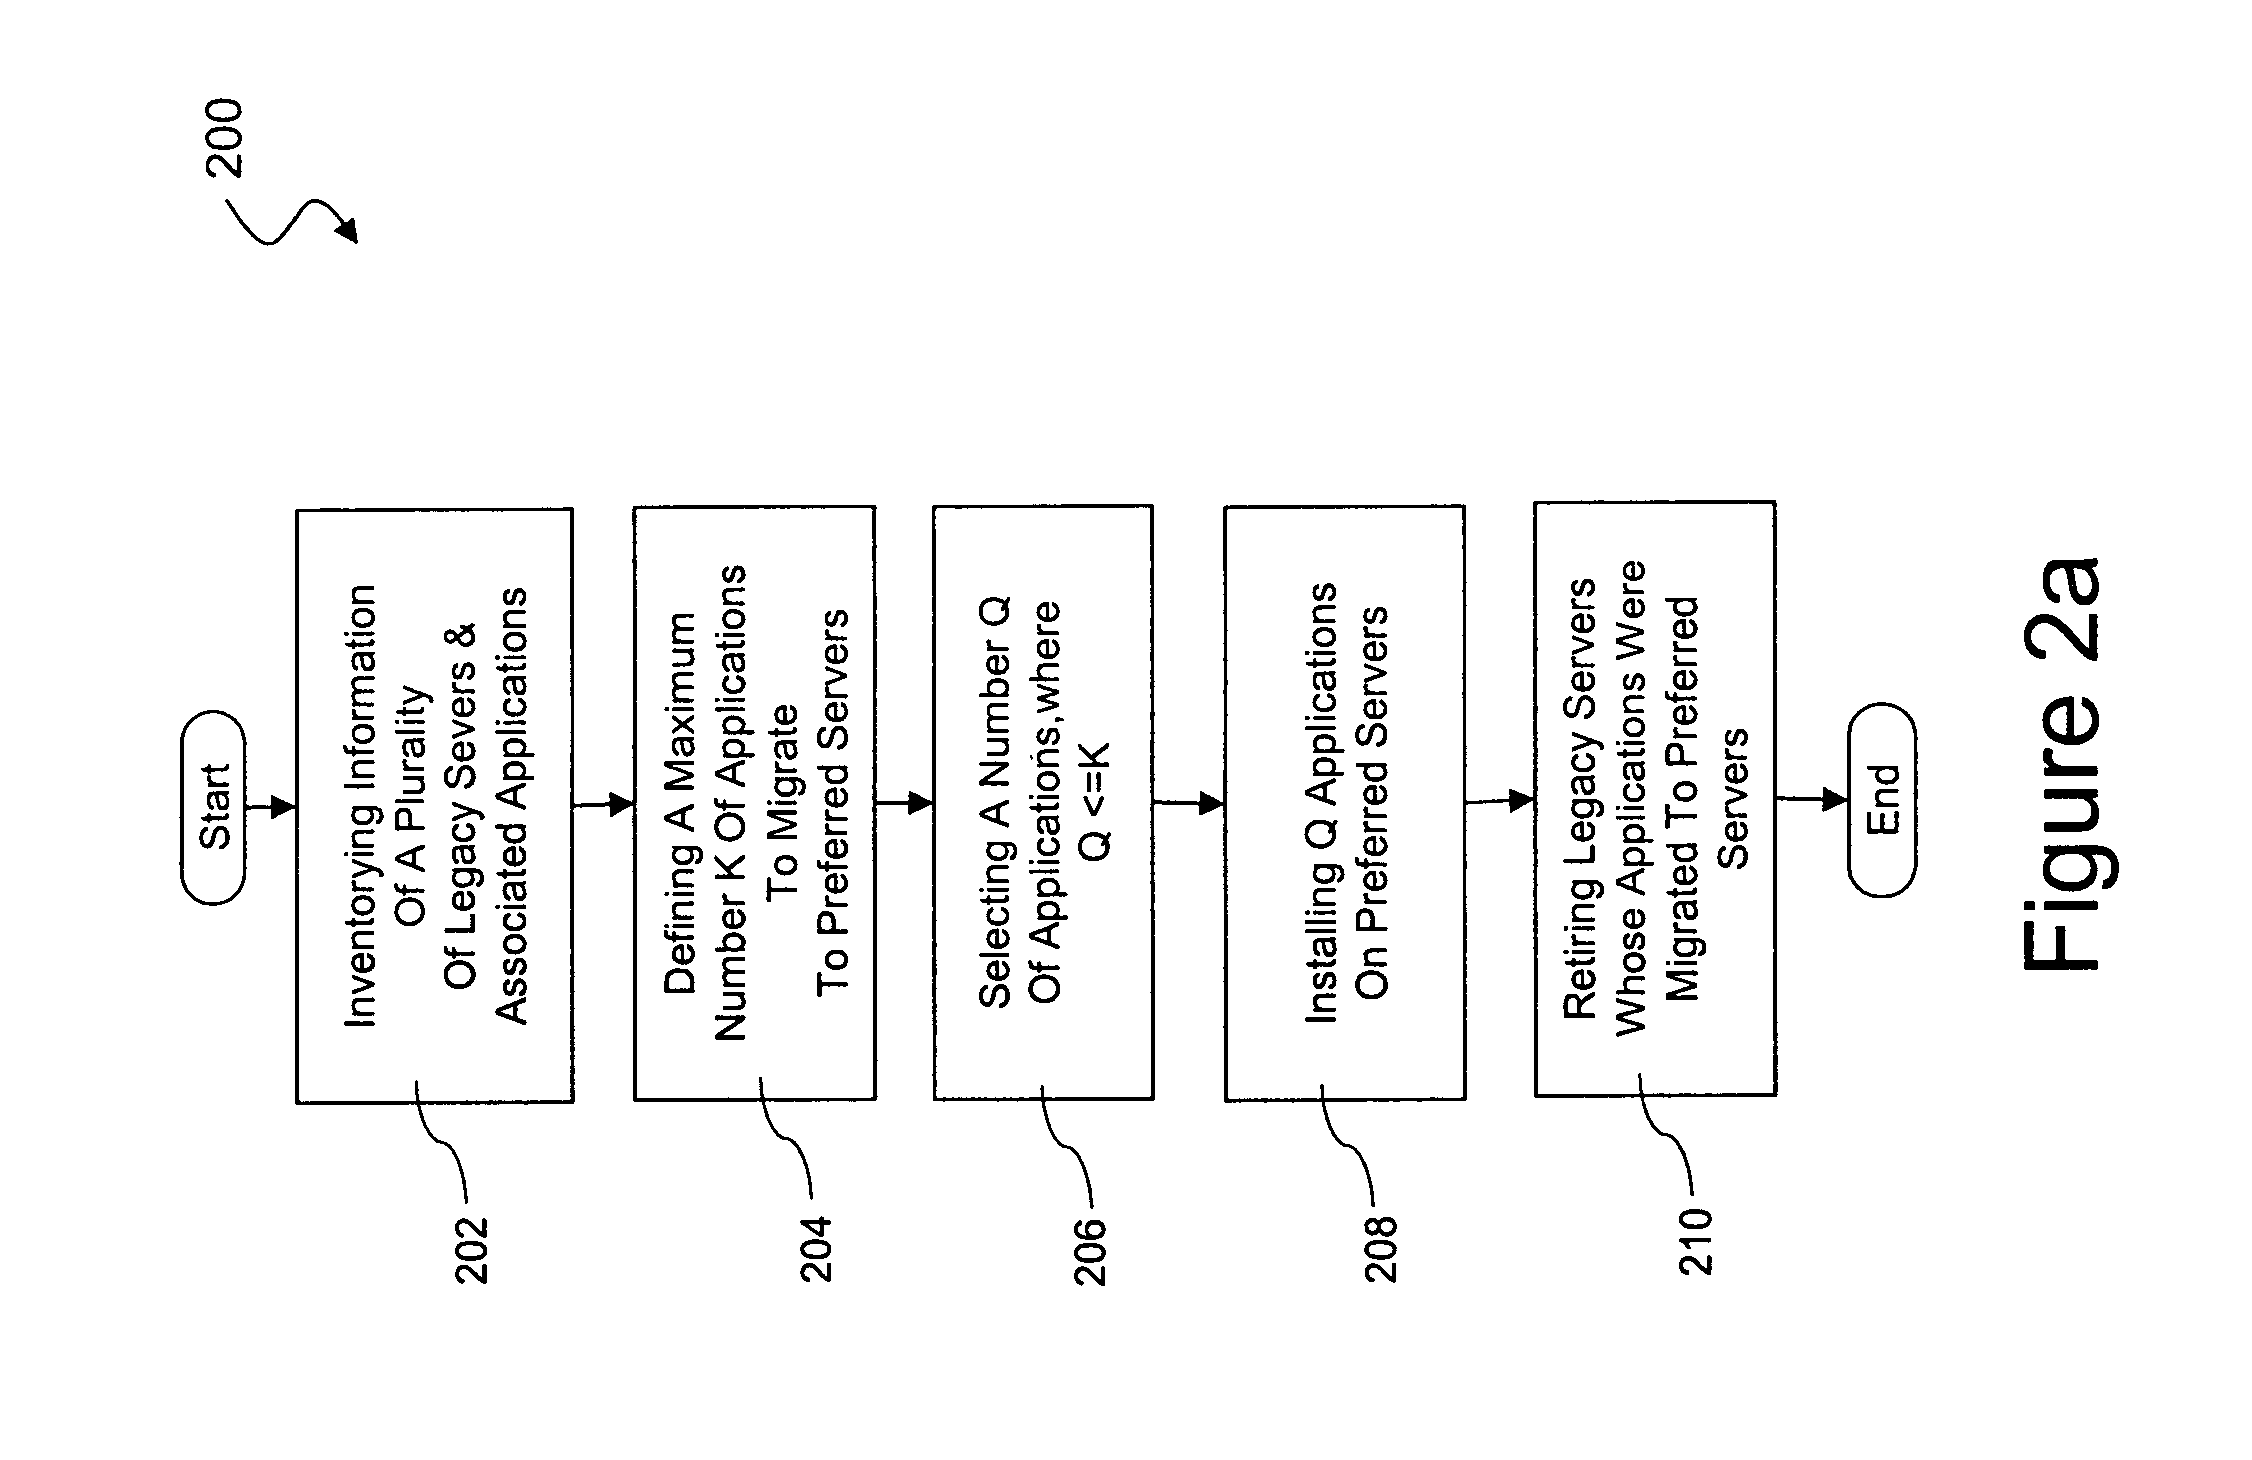 System and method of implementing major application migration